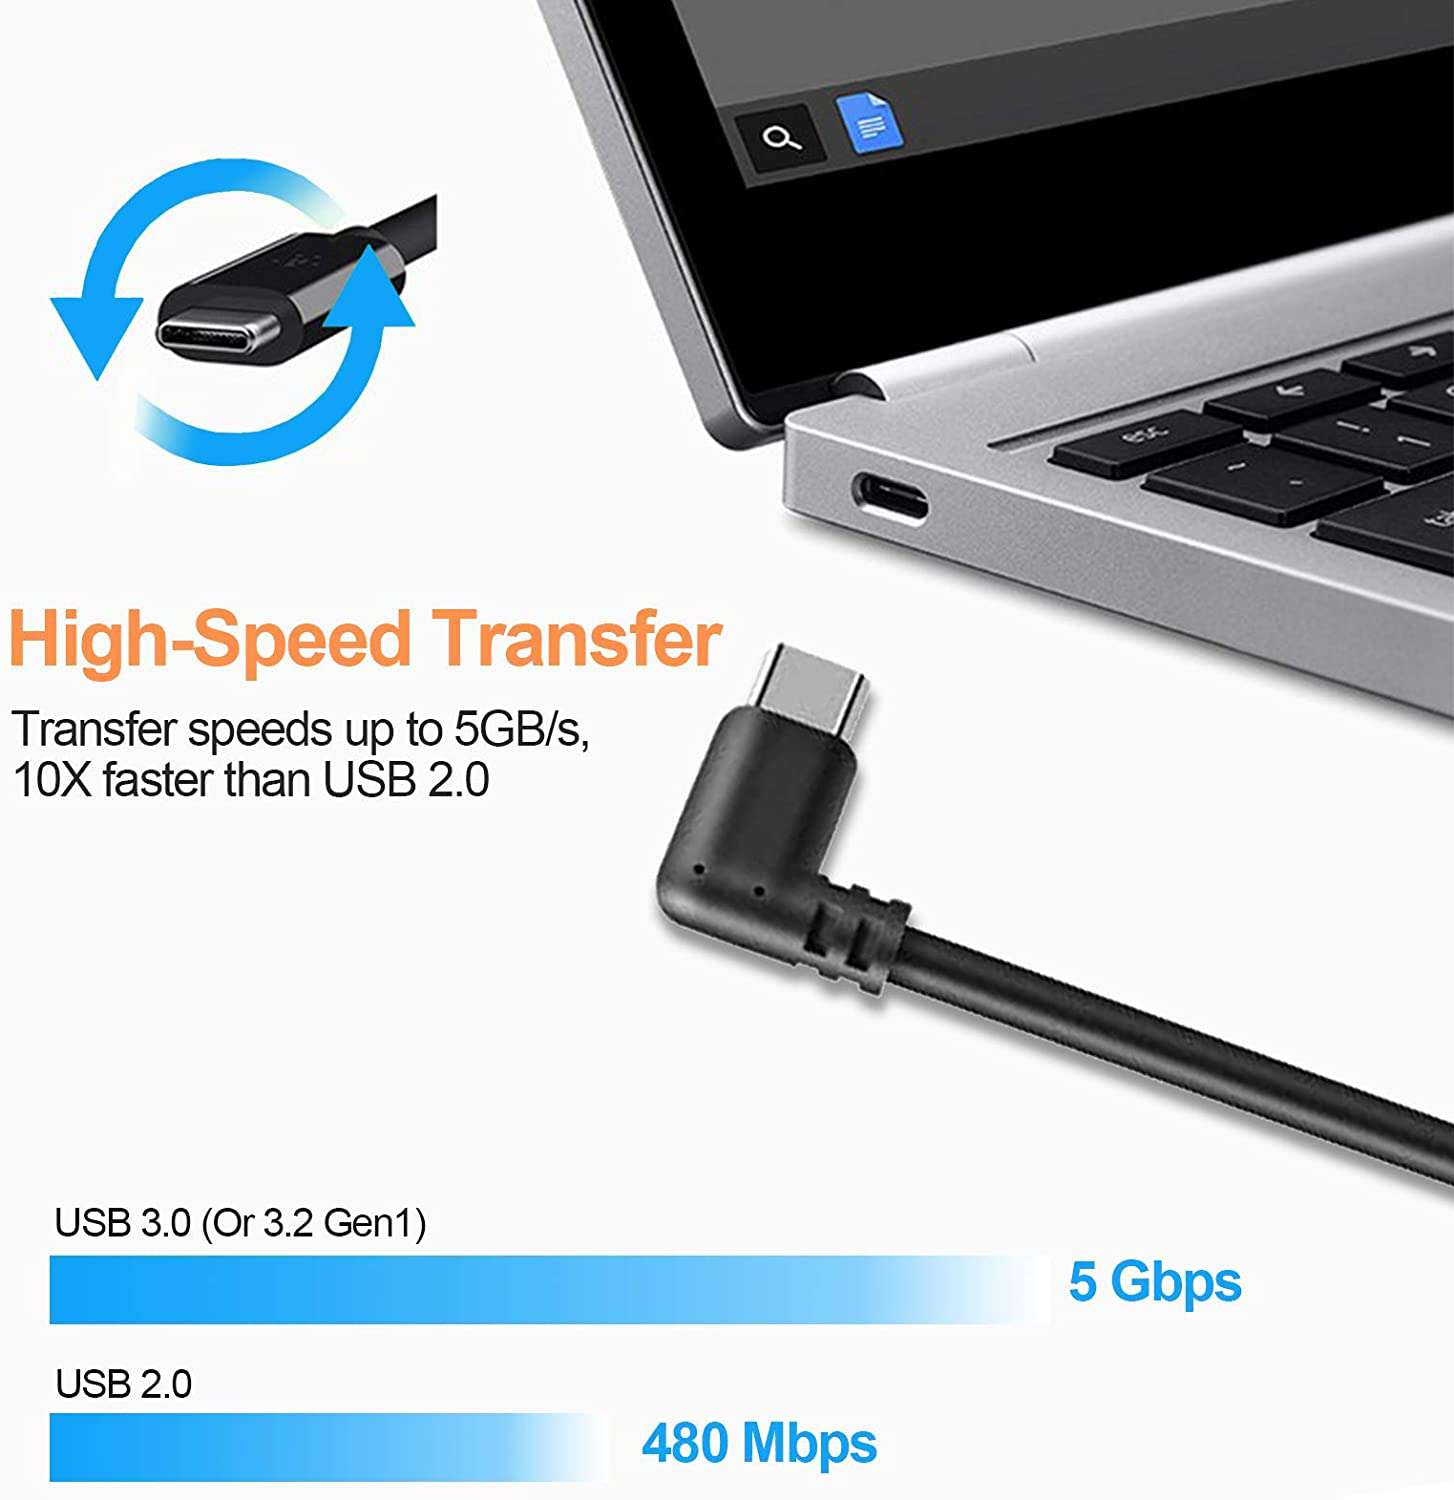 The cable supports USB 3.0 w/512Mbps, which is faster than other USB 2.0/480Mbps